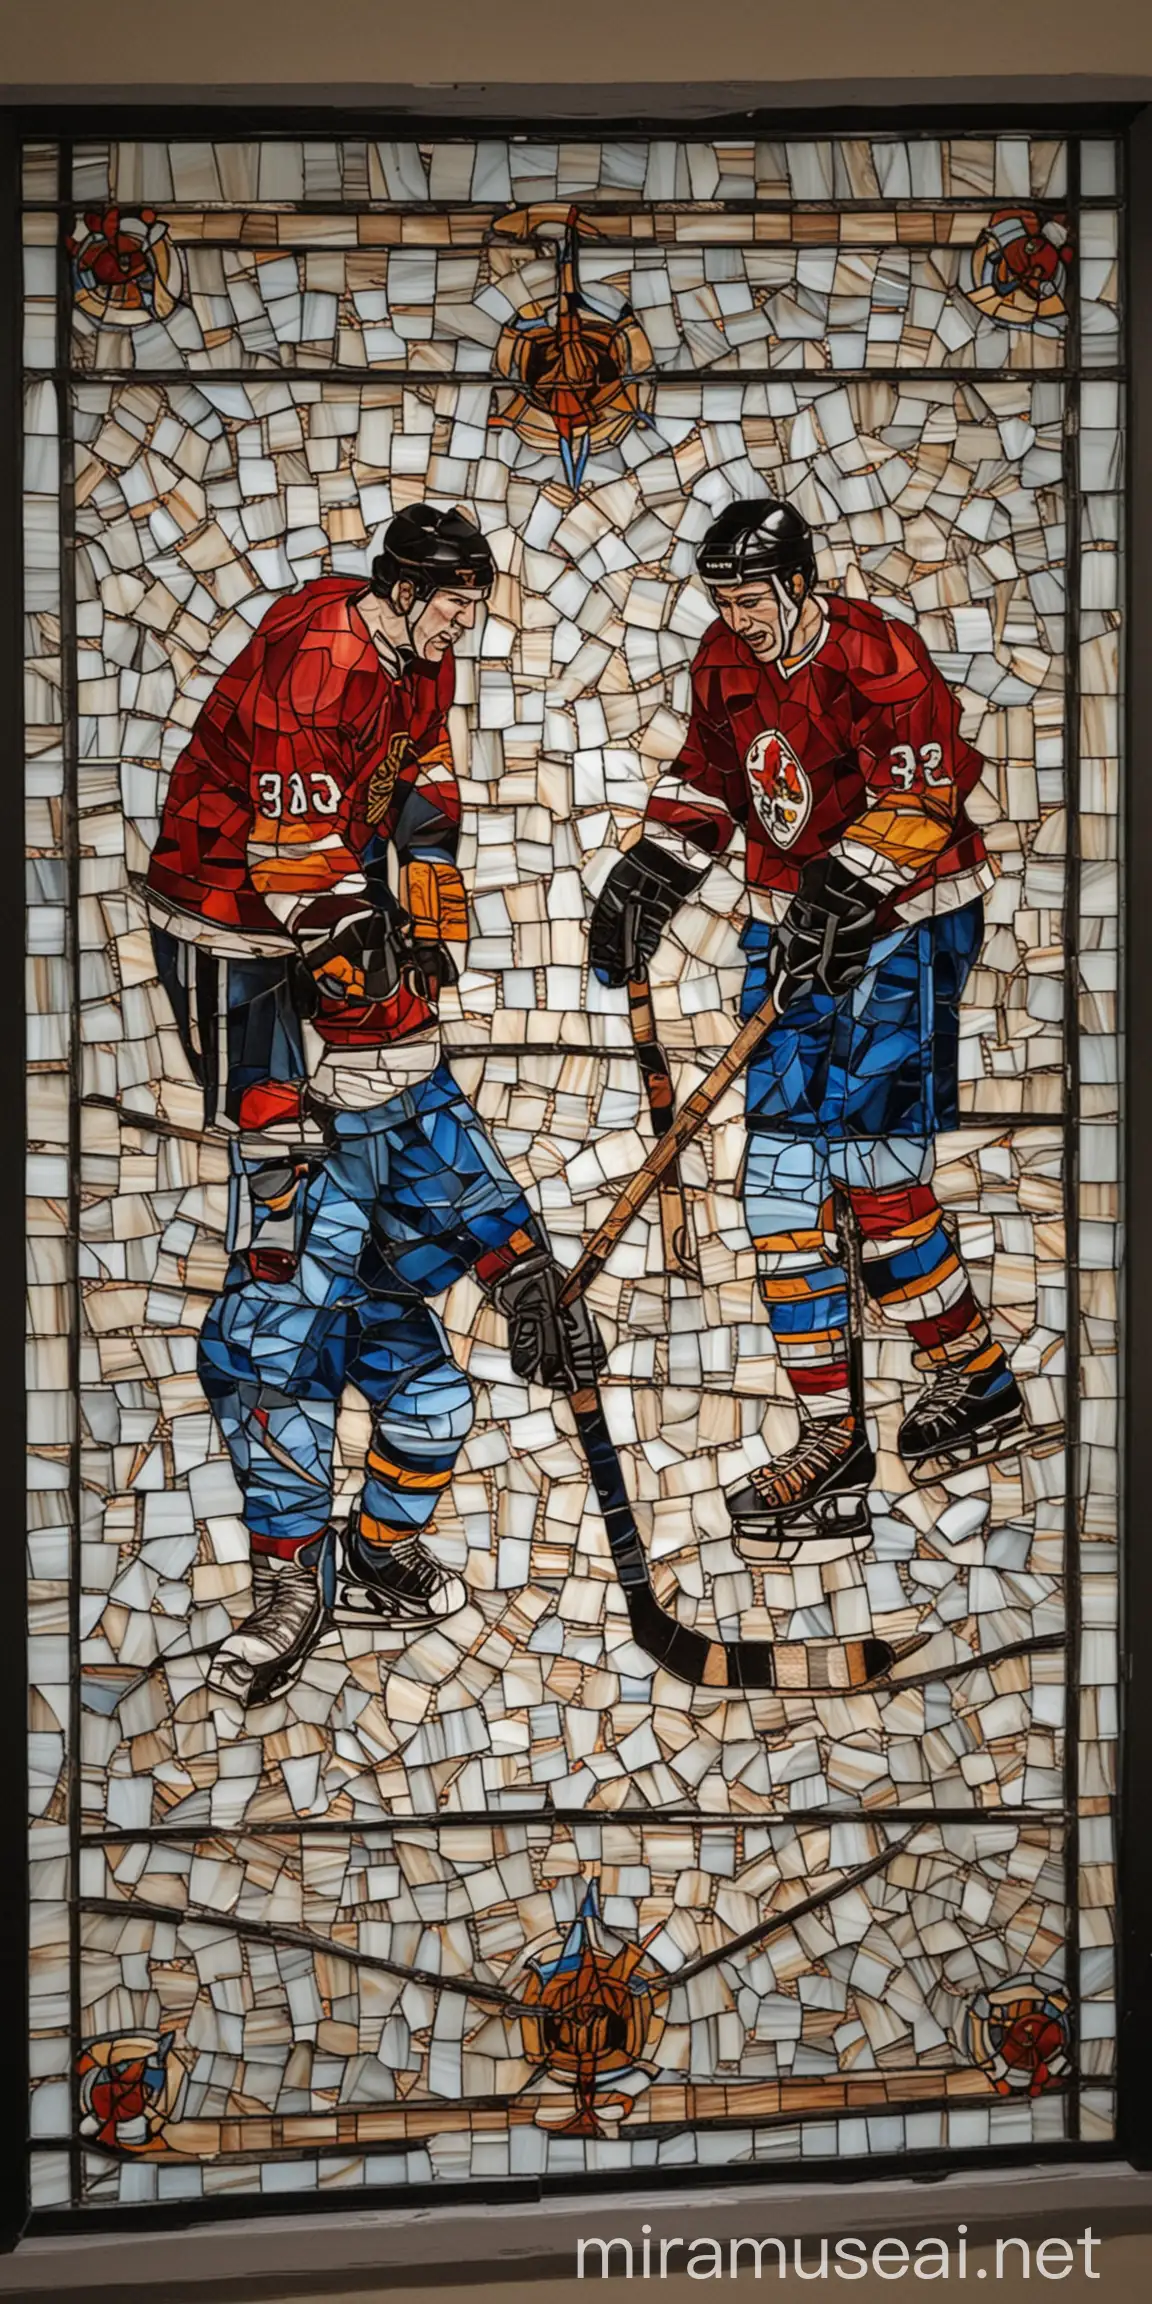 Stained Glass Mosaic Hockey Players in Action